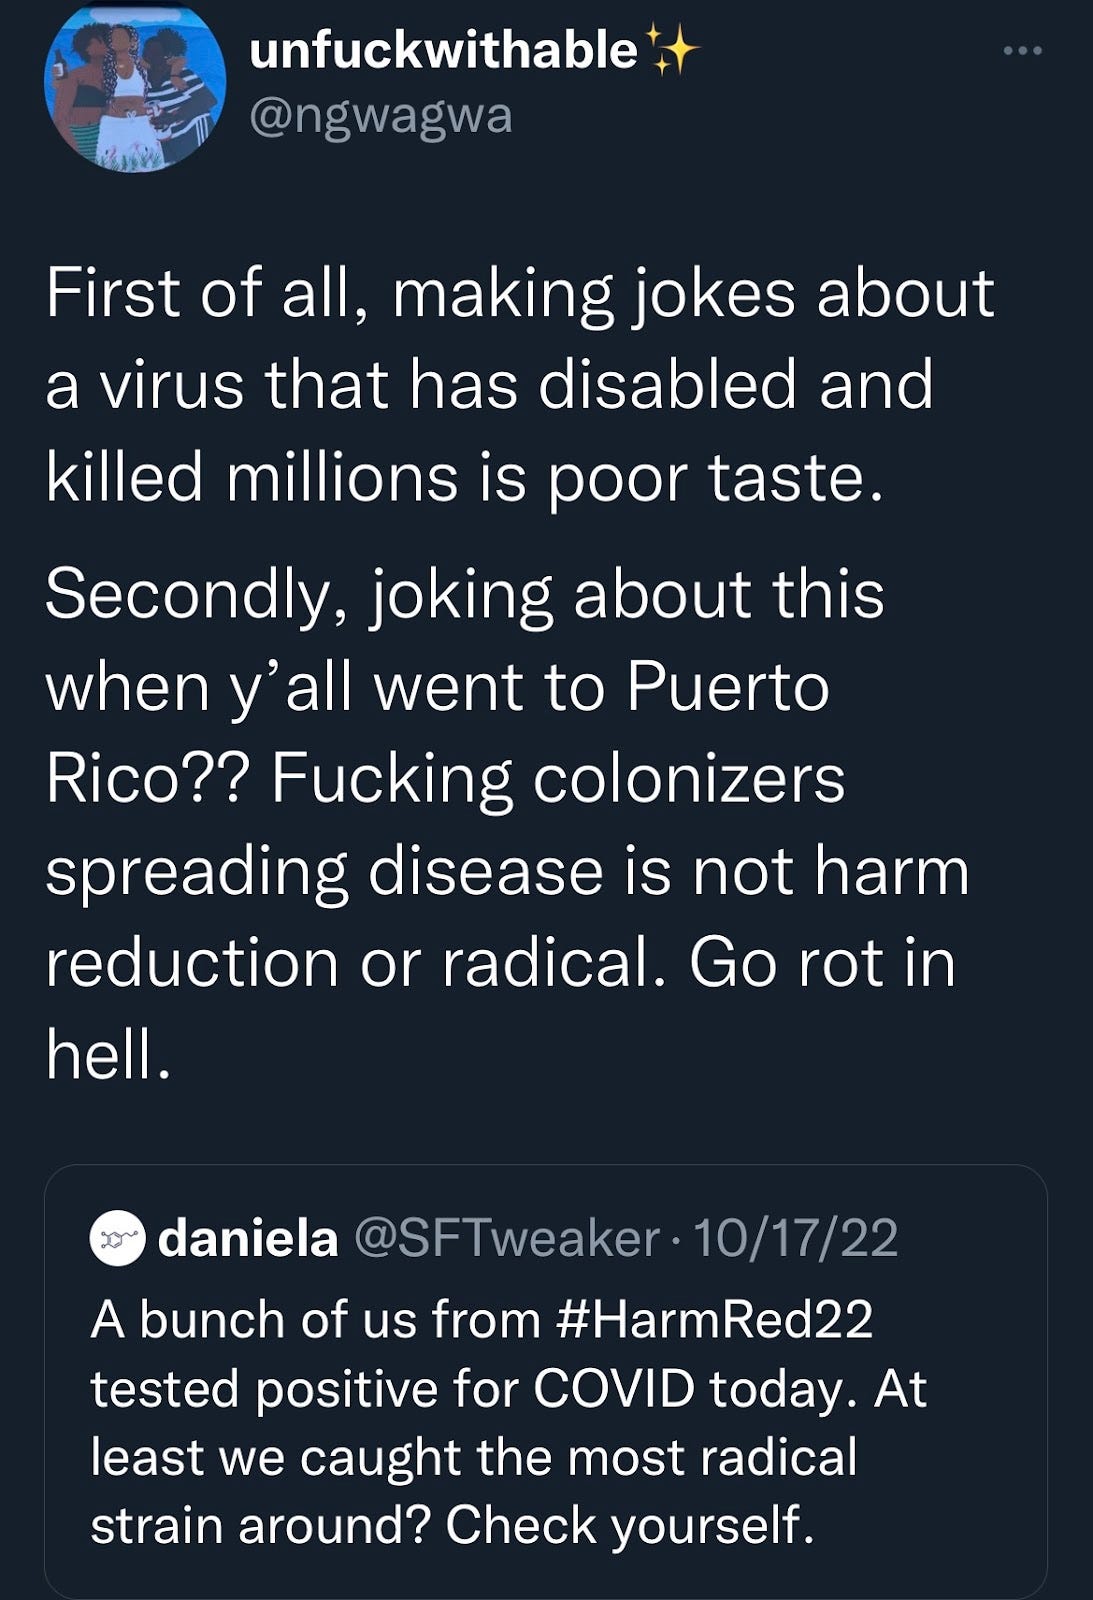 A quote tweet from @ngwagwa, expanding upon the original tweet: “First of all, making jokes about a virus that has disabled and killed millions is poor taste. Secondly, joking about this when y’all went to Puerto Rico?? Fucking colonizers spreading disease is not harm reduction or radical. Go to hell.”